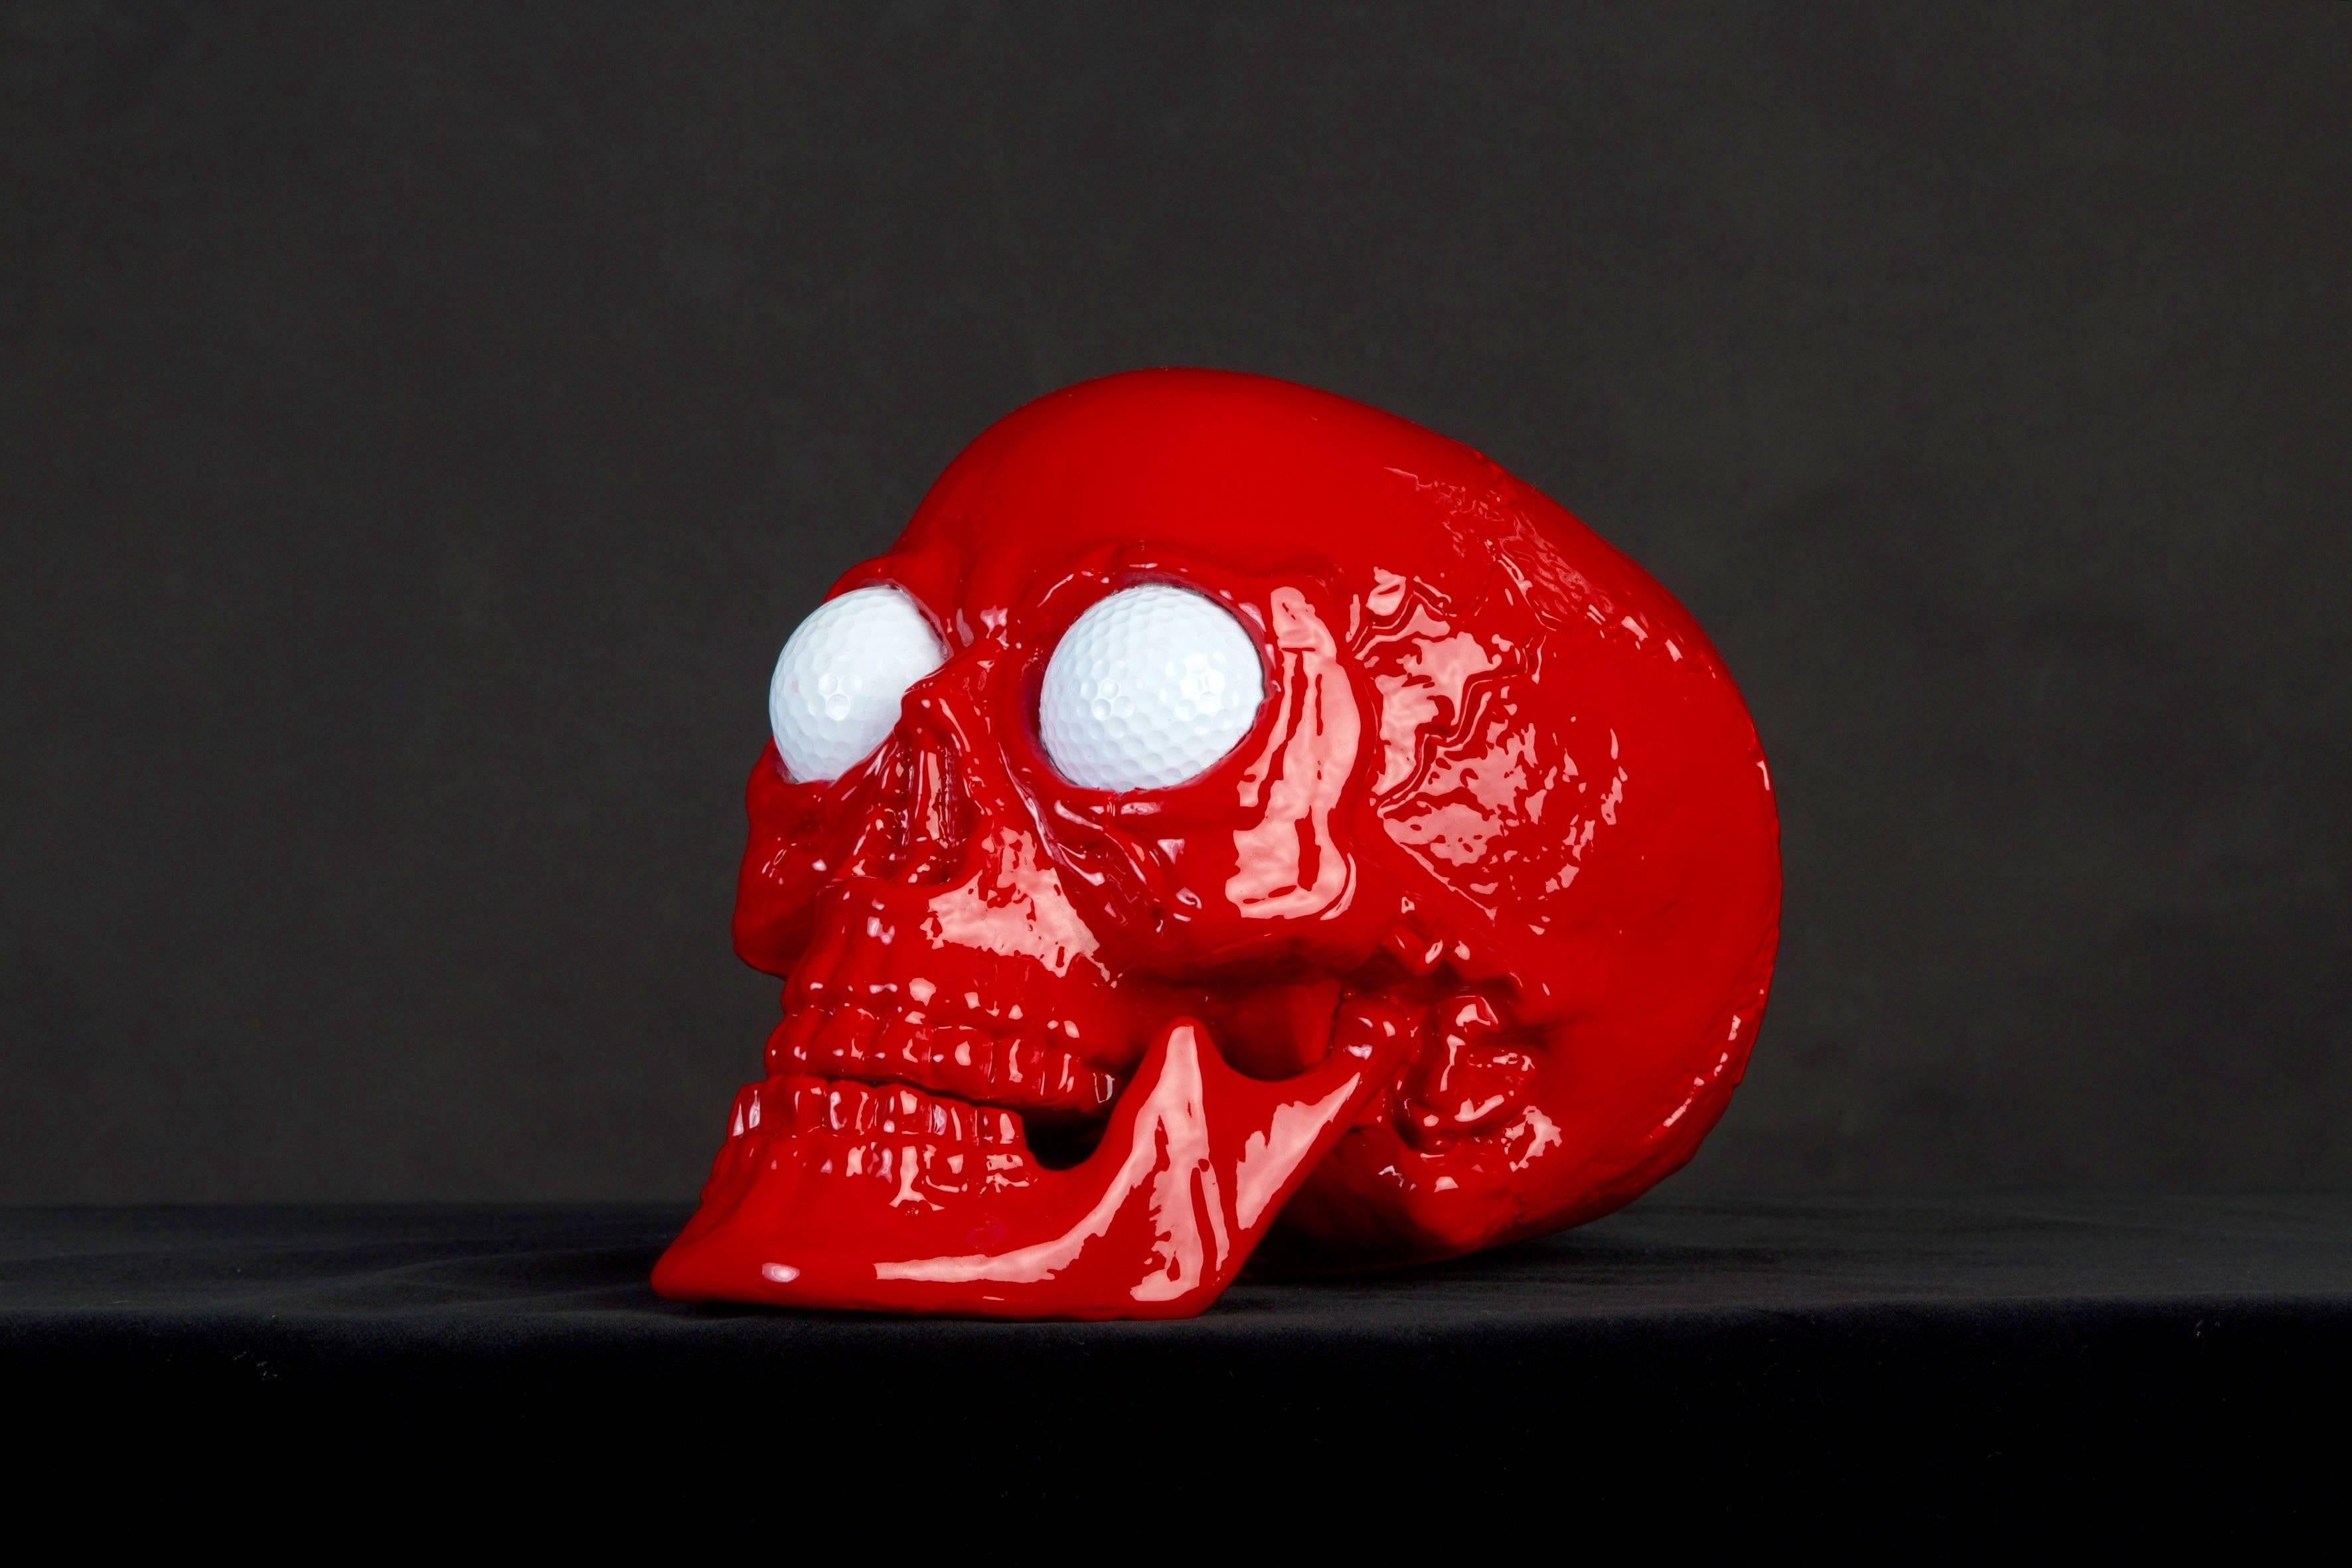 If shipped to the US or EU, no import tax applies.  

Made out of resin with actual golf balls inserted in the eye sockets, this skull sculpture is created by Hubert Prive, a French artists based in Normandie and a Pioneer of golf art now renowned